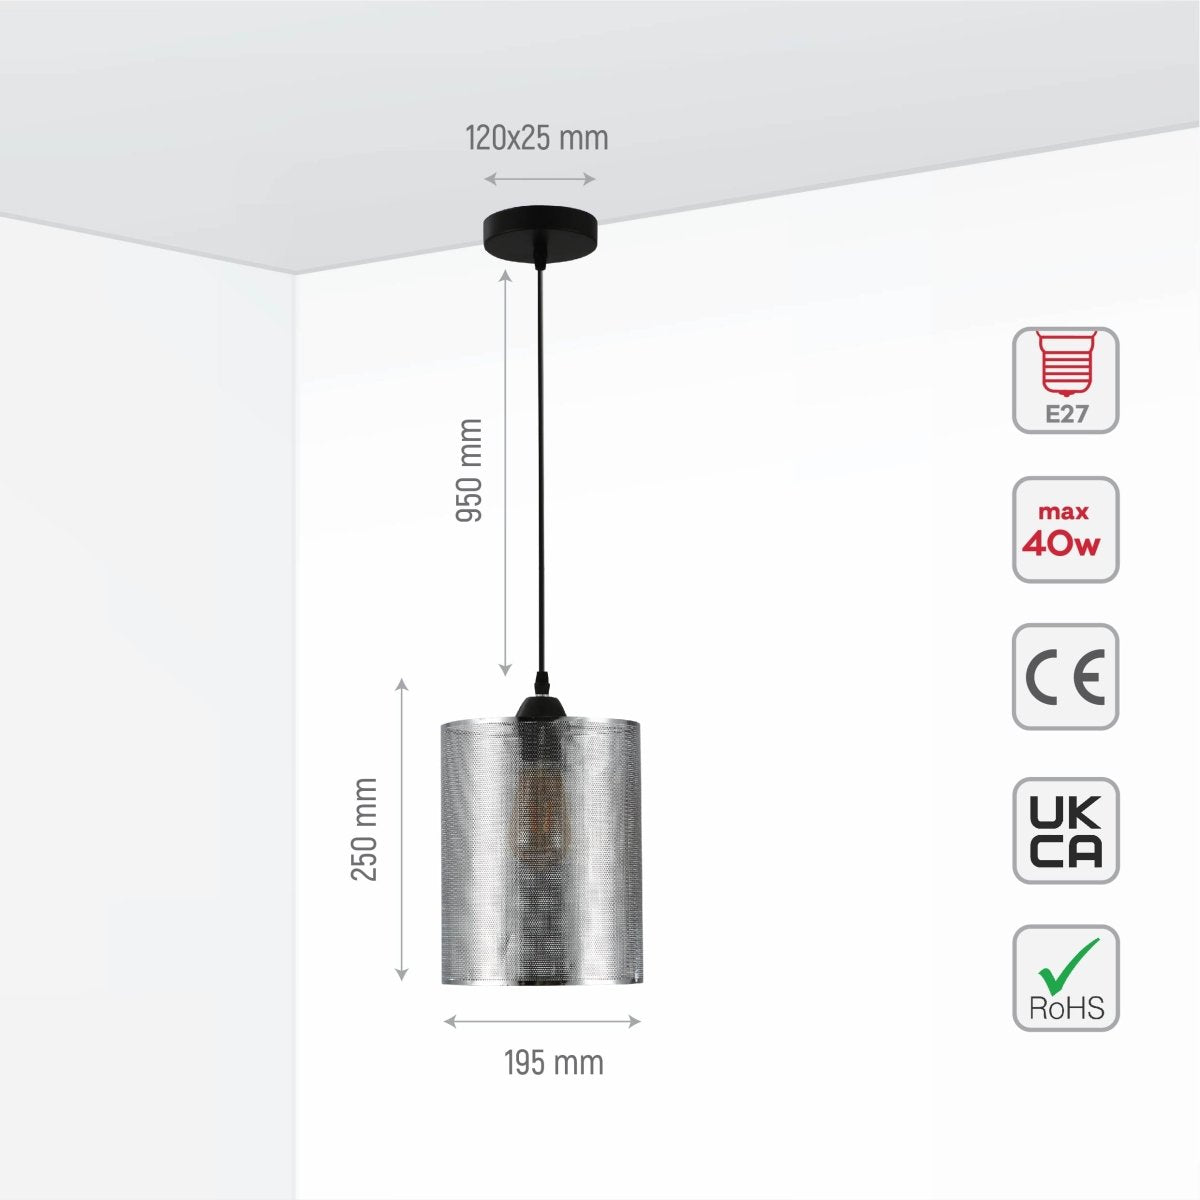 Size and specs of Sieve Chrome Cylinder Metal Pendant Ceiling Light D110 with E27 Fitting | TEKLED 158-19784